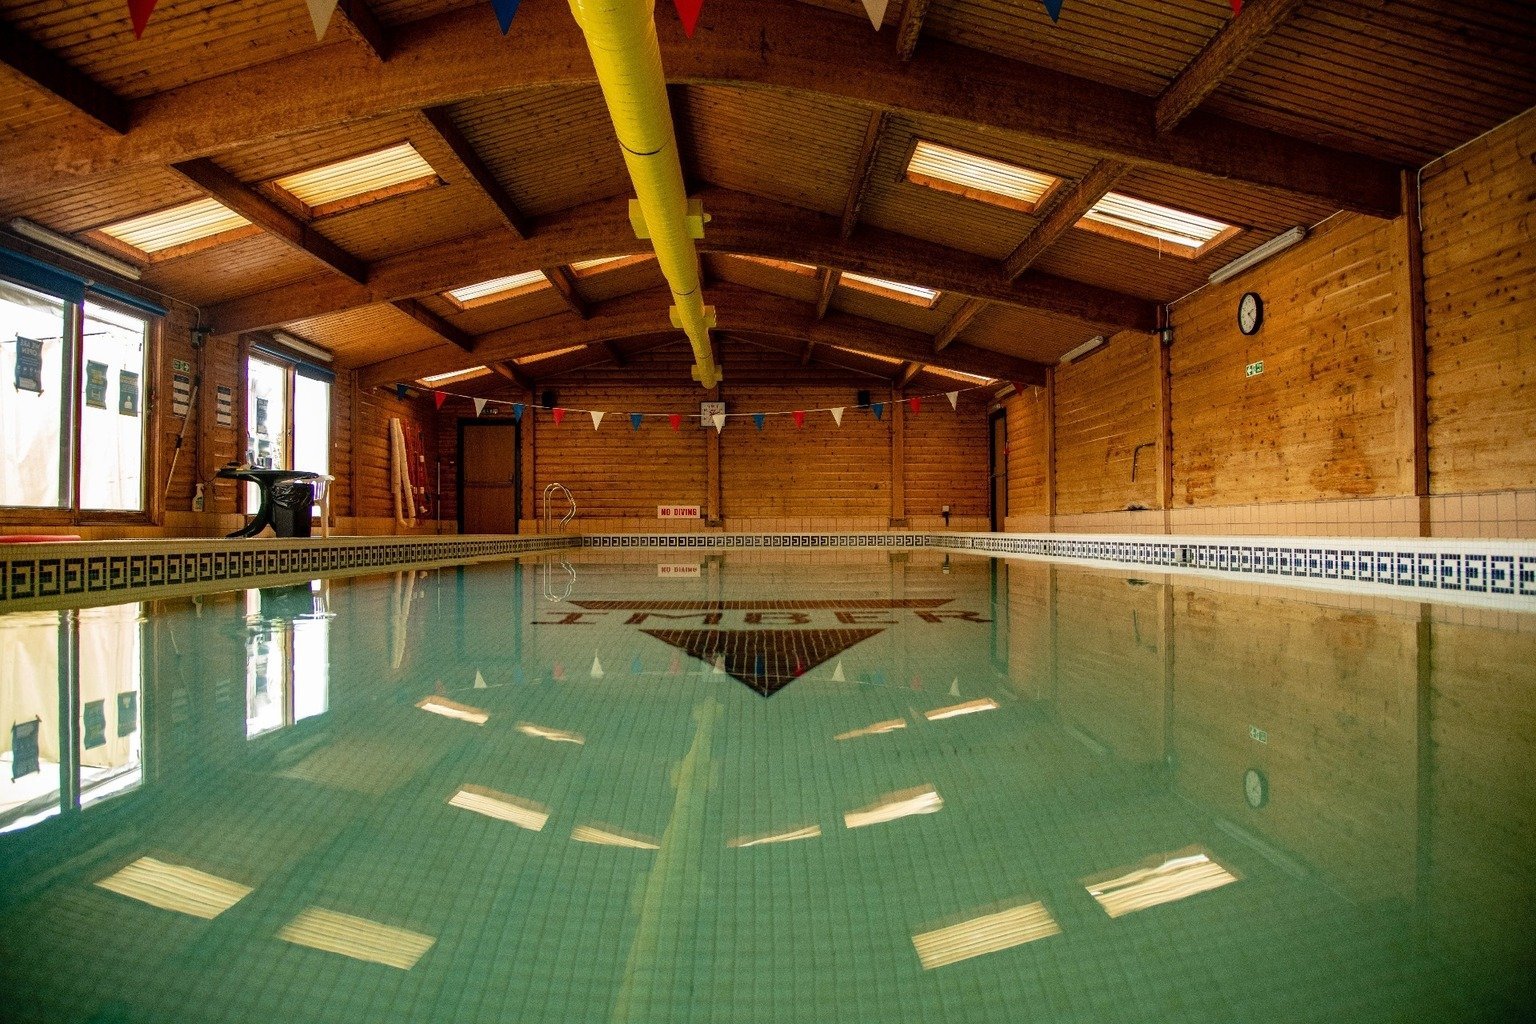 The Imber Court Swimming Pool